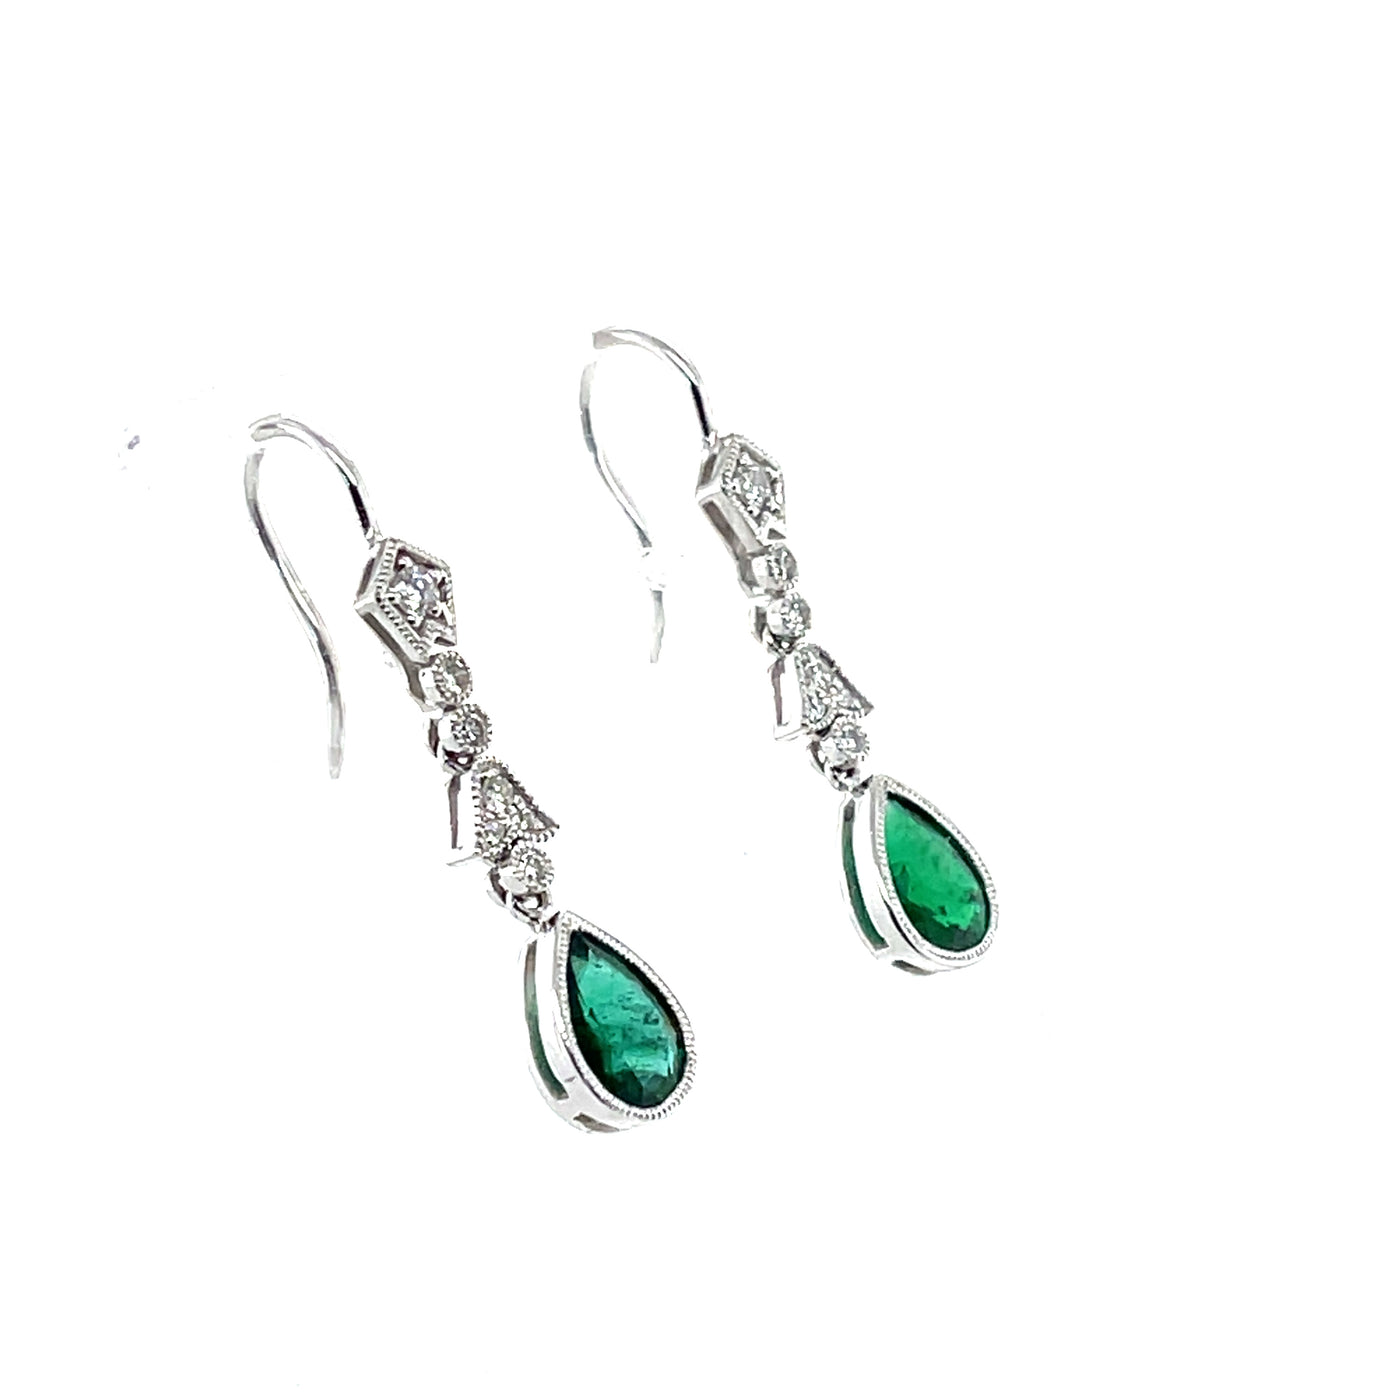 18CT White Gold Emerald and Diamond Earrings